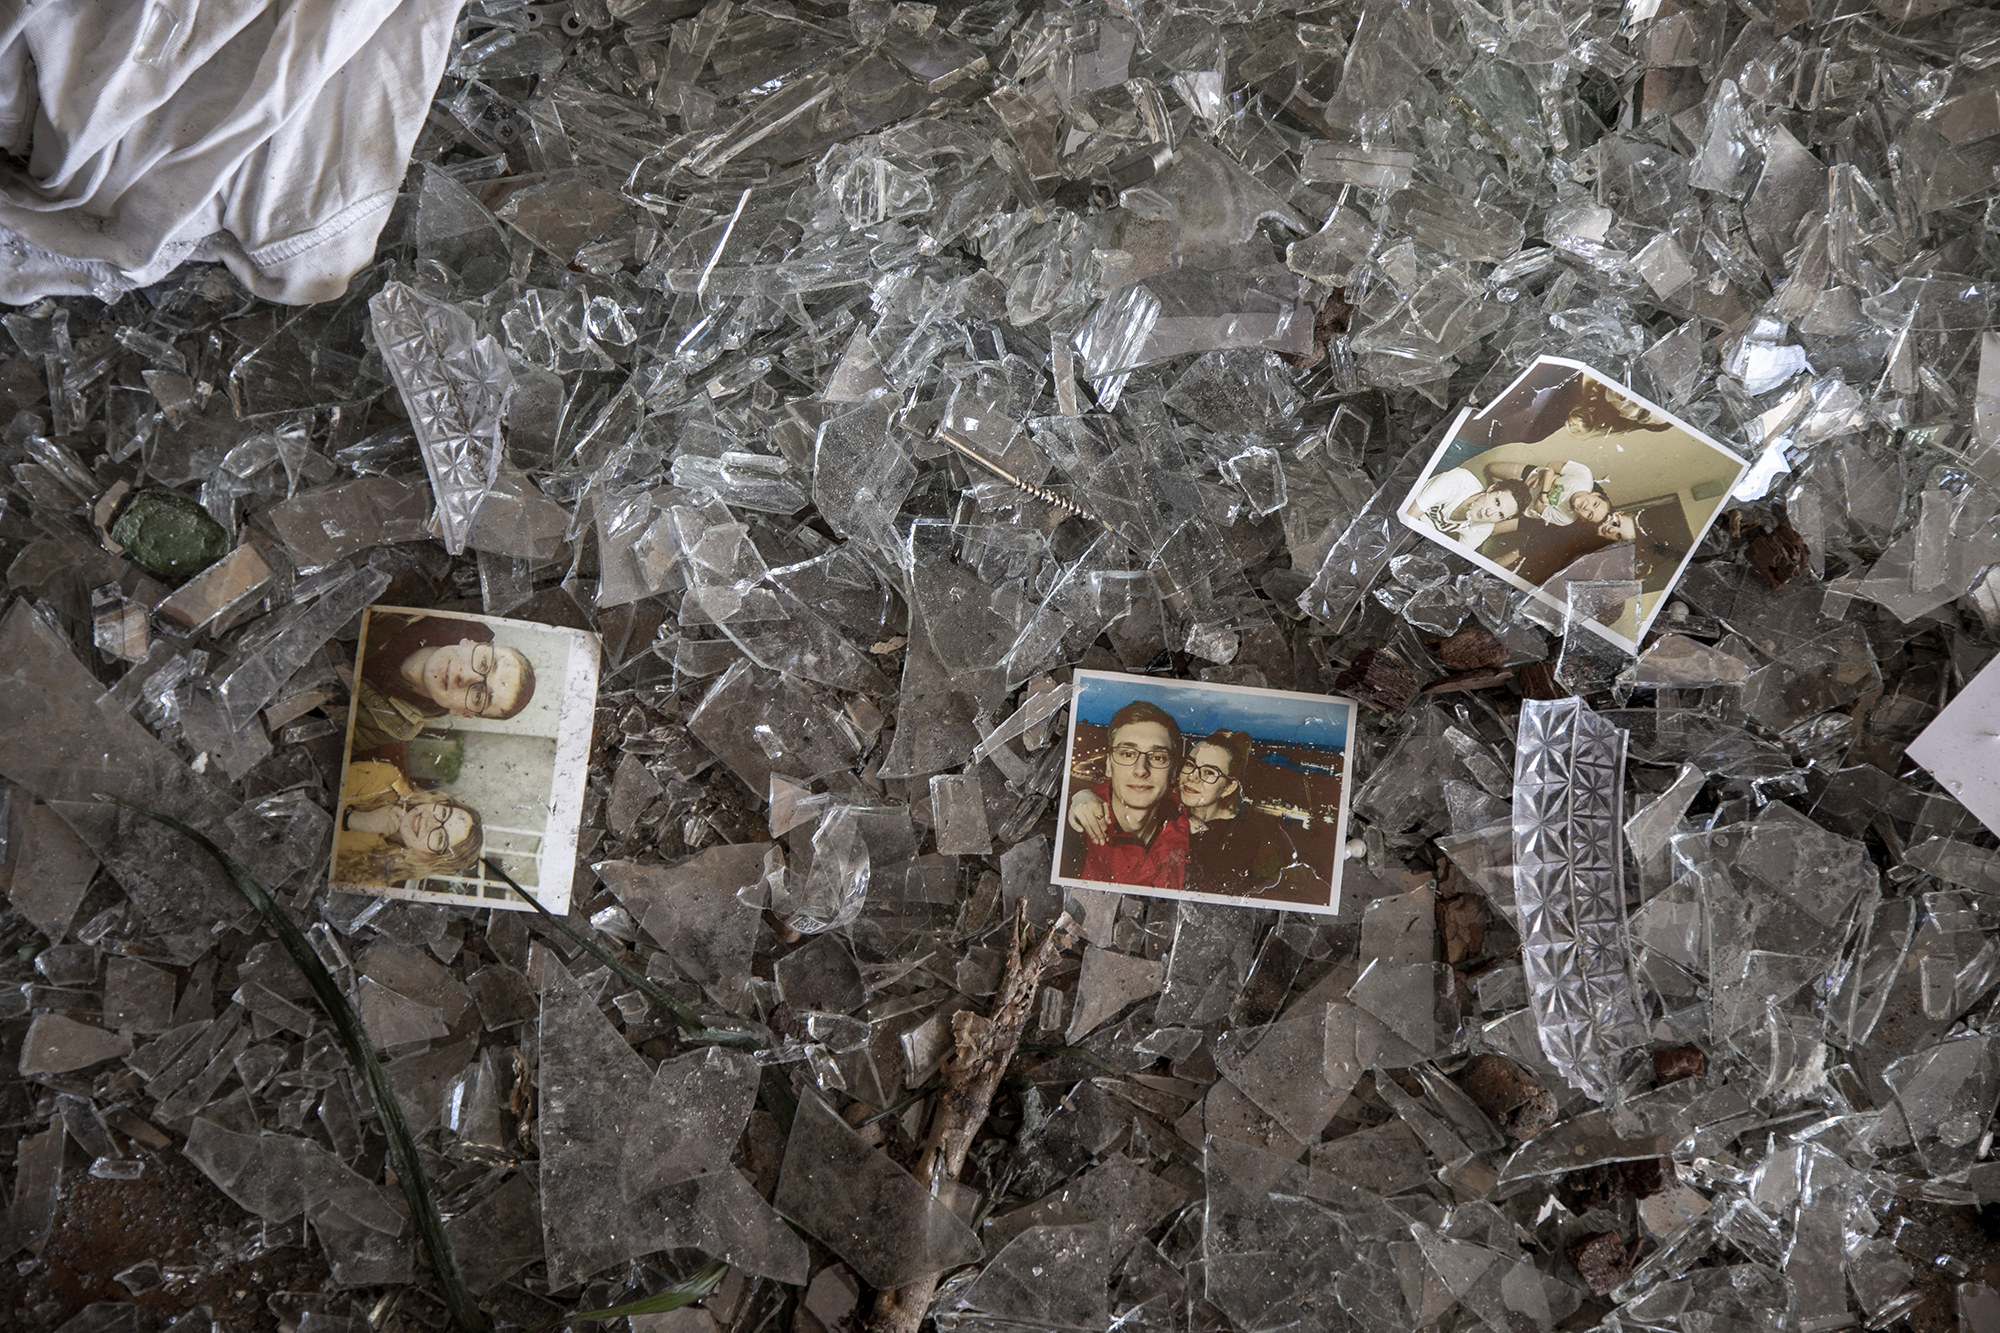 Portrait photos of a couple are seen scattered on a floor covered in debris in an apartment damaged by a bombing in Kyiv